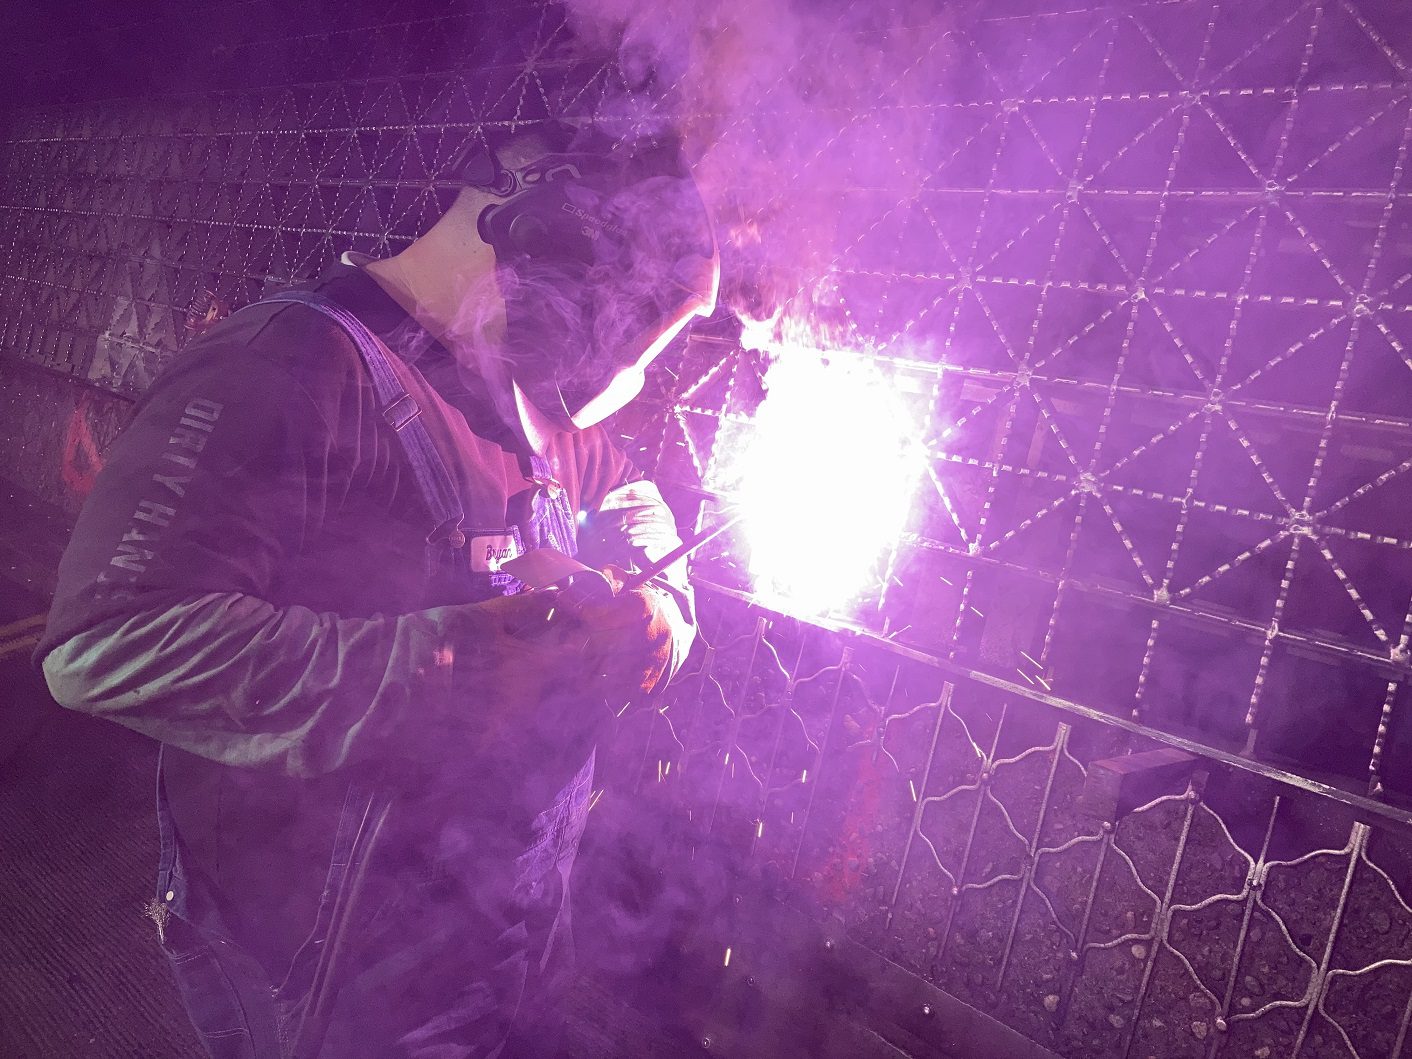 A welder works on the Fremont Bridge deck grating during a recent overnight closure. The person is wearing protective equipment, and the welding creates a bright purple light.